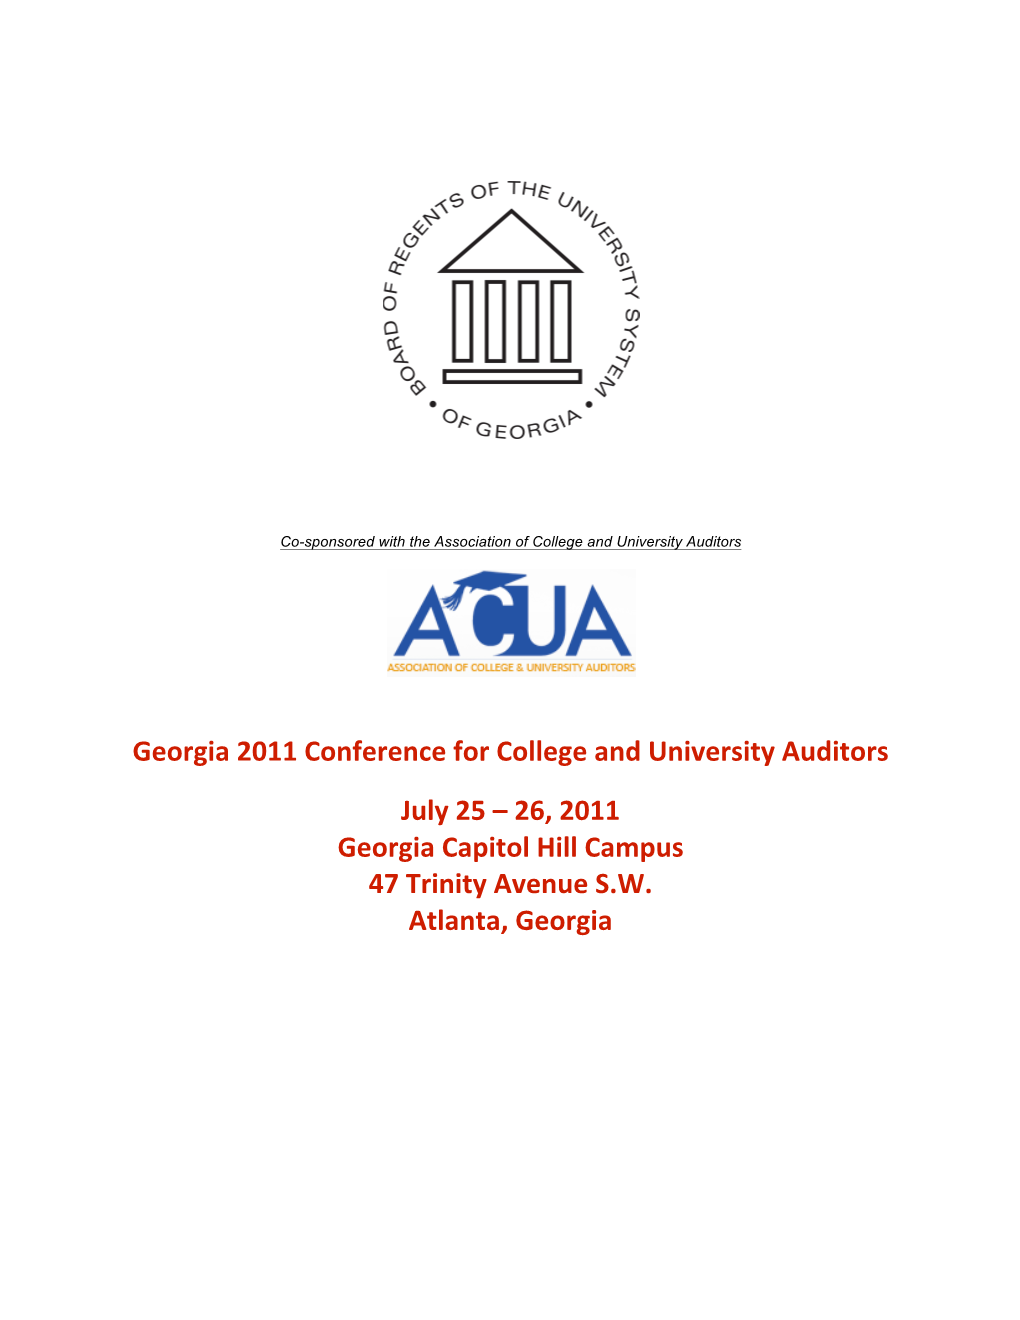 Georgia 2011 Conference for College and University Auditors July 25 – 26, 2011 Georgia Capitol Hill Campus 47 Trinity Avenue S.W